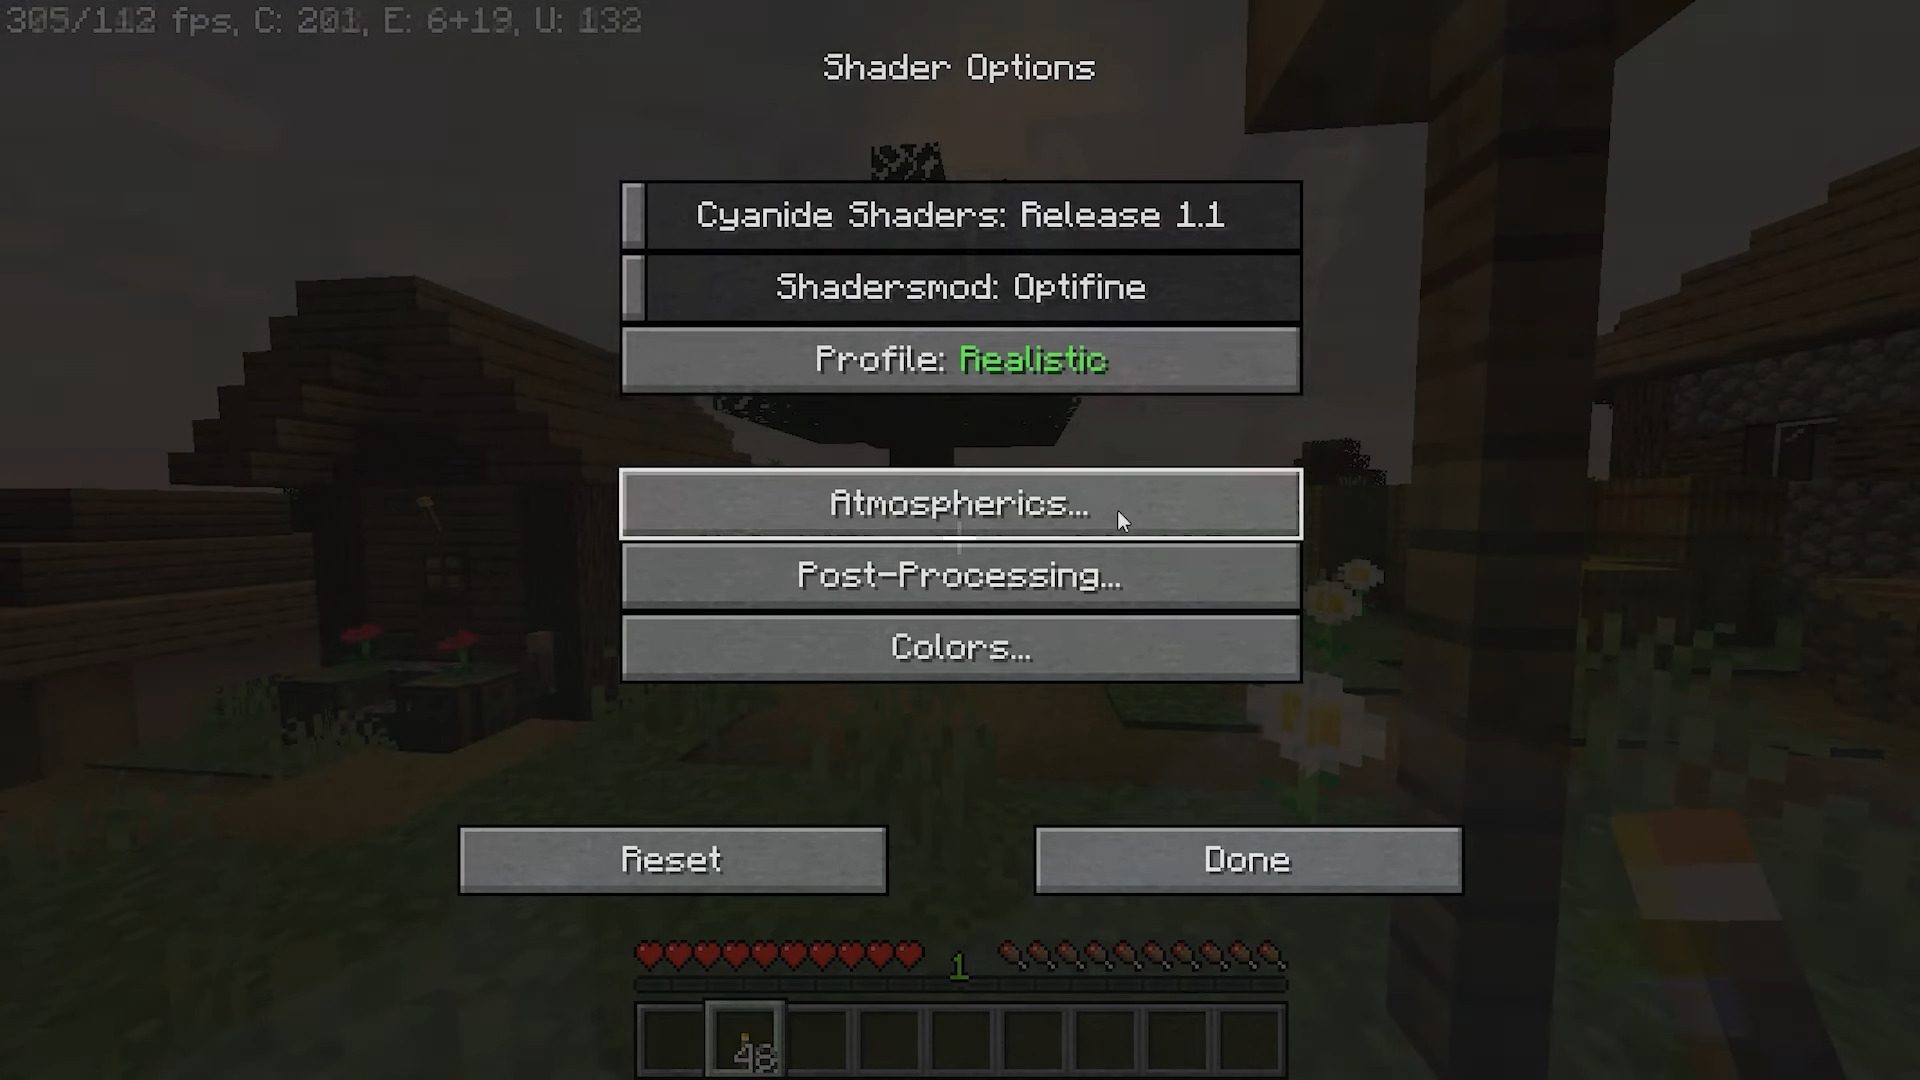 Cyanide Shaders (1.20.4, 1.19.4) - Low-End PCs Friendly 5